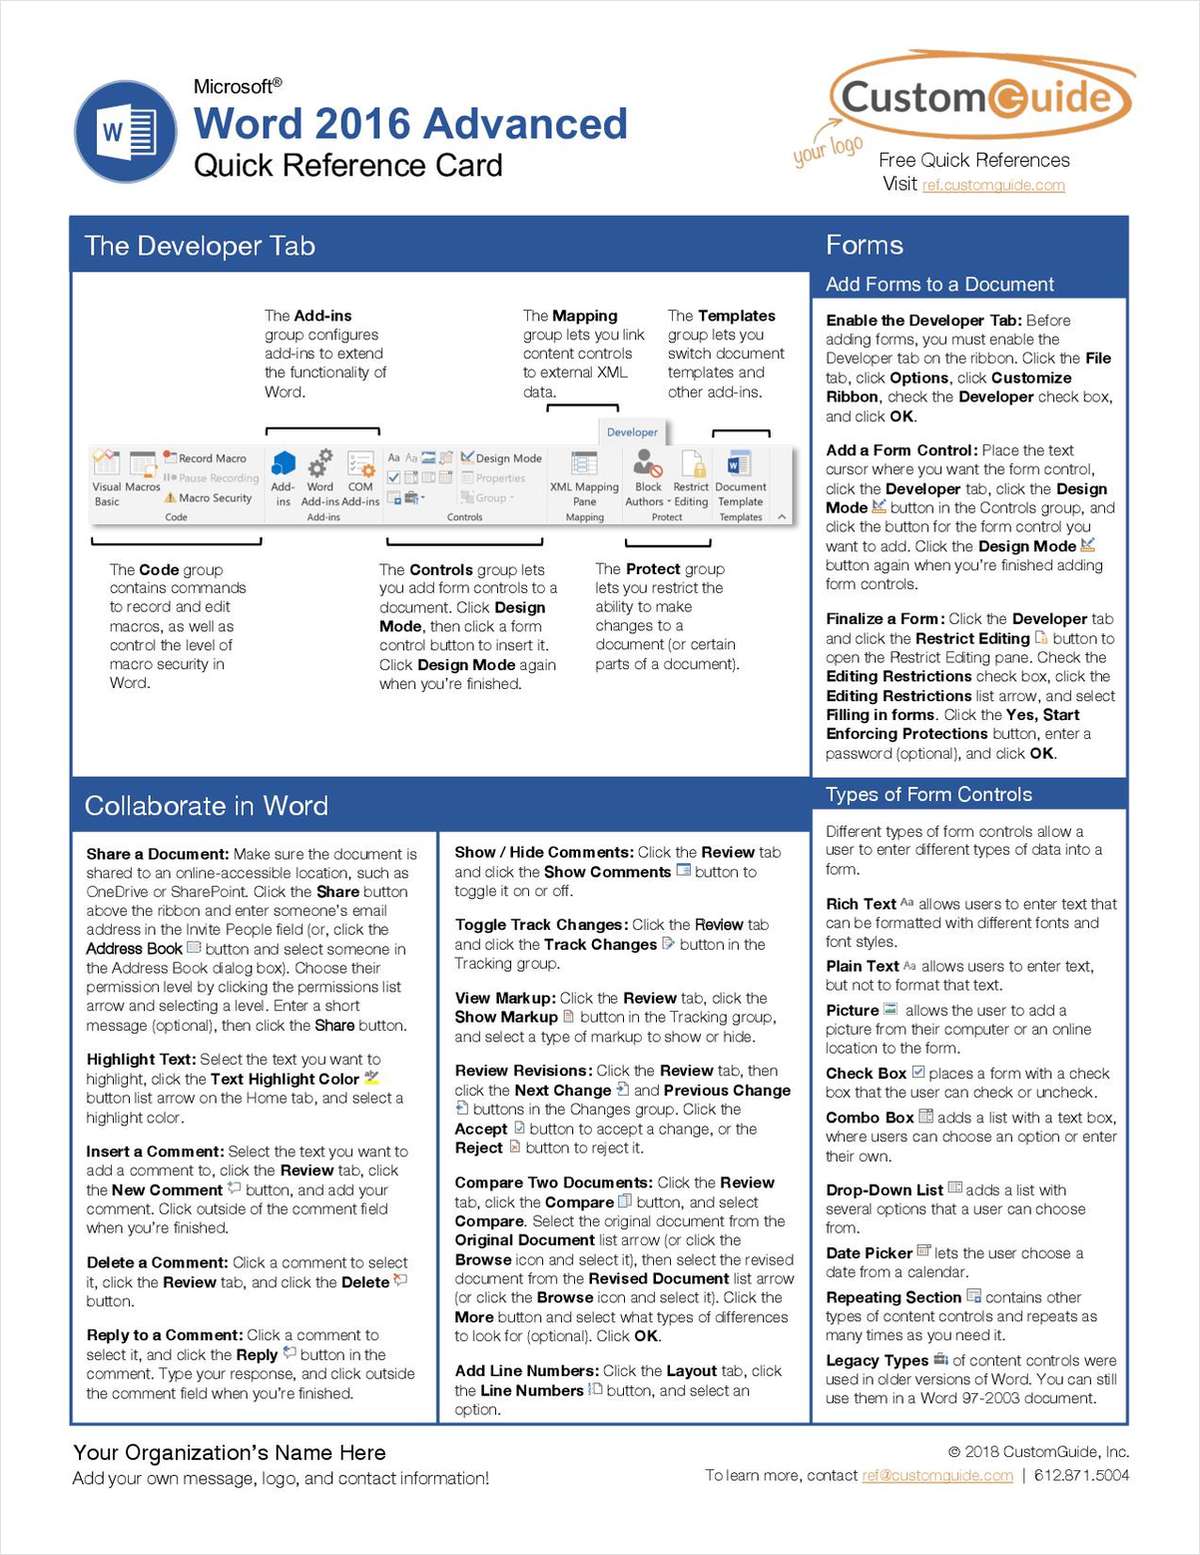 Microsoft Word 2016 Advanced - Quick Reference Card